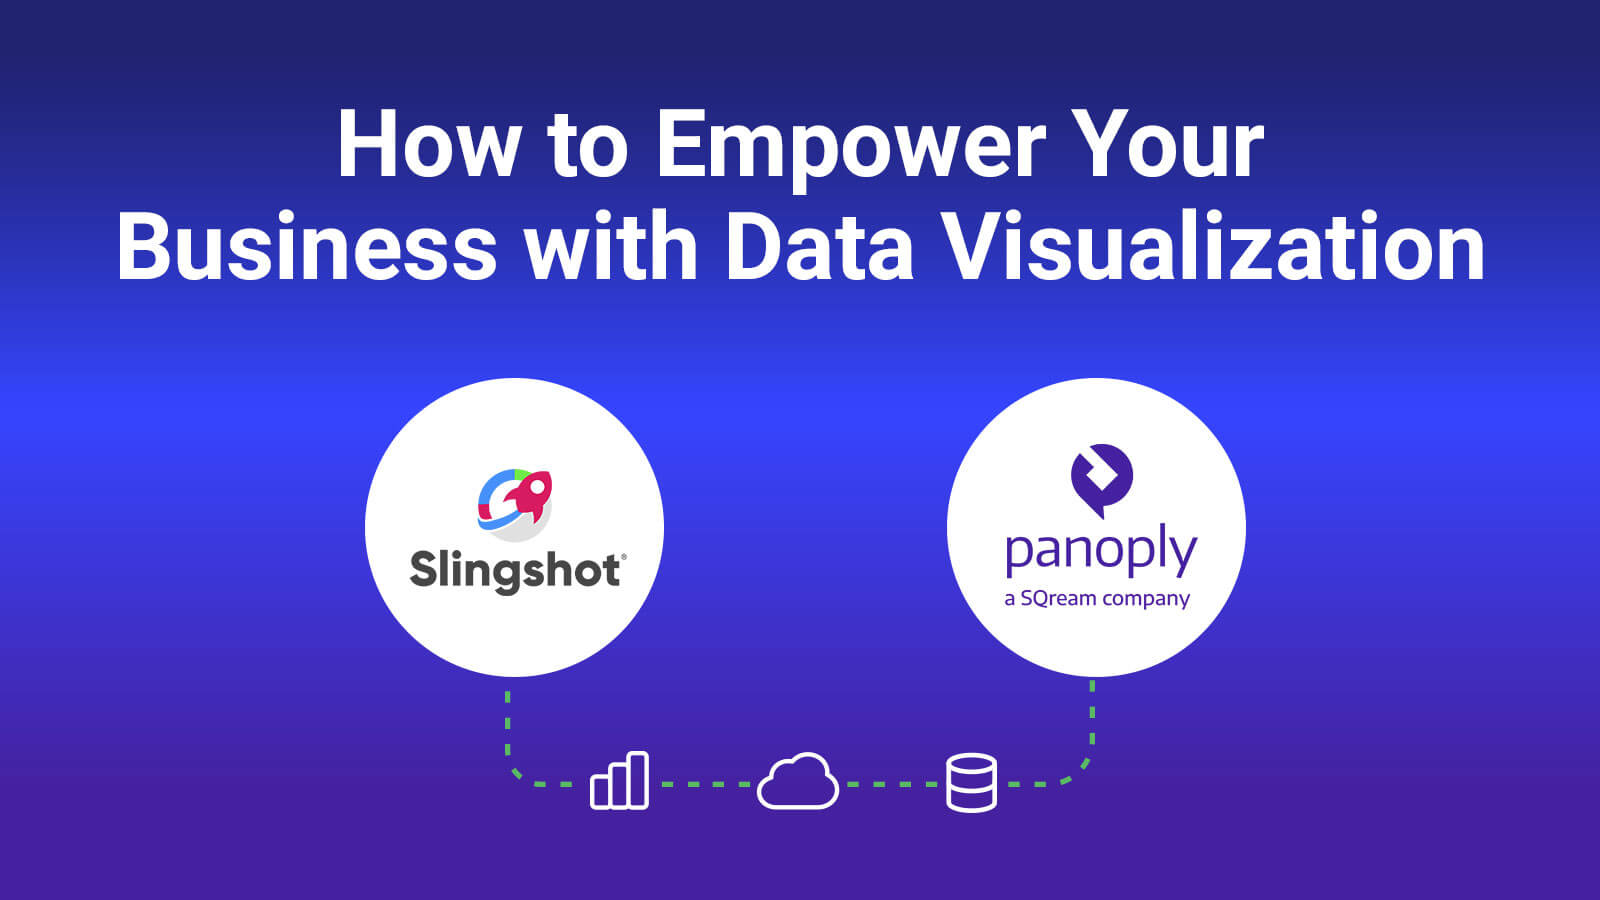 Slingshot and Panoply empowers business data analytics